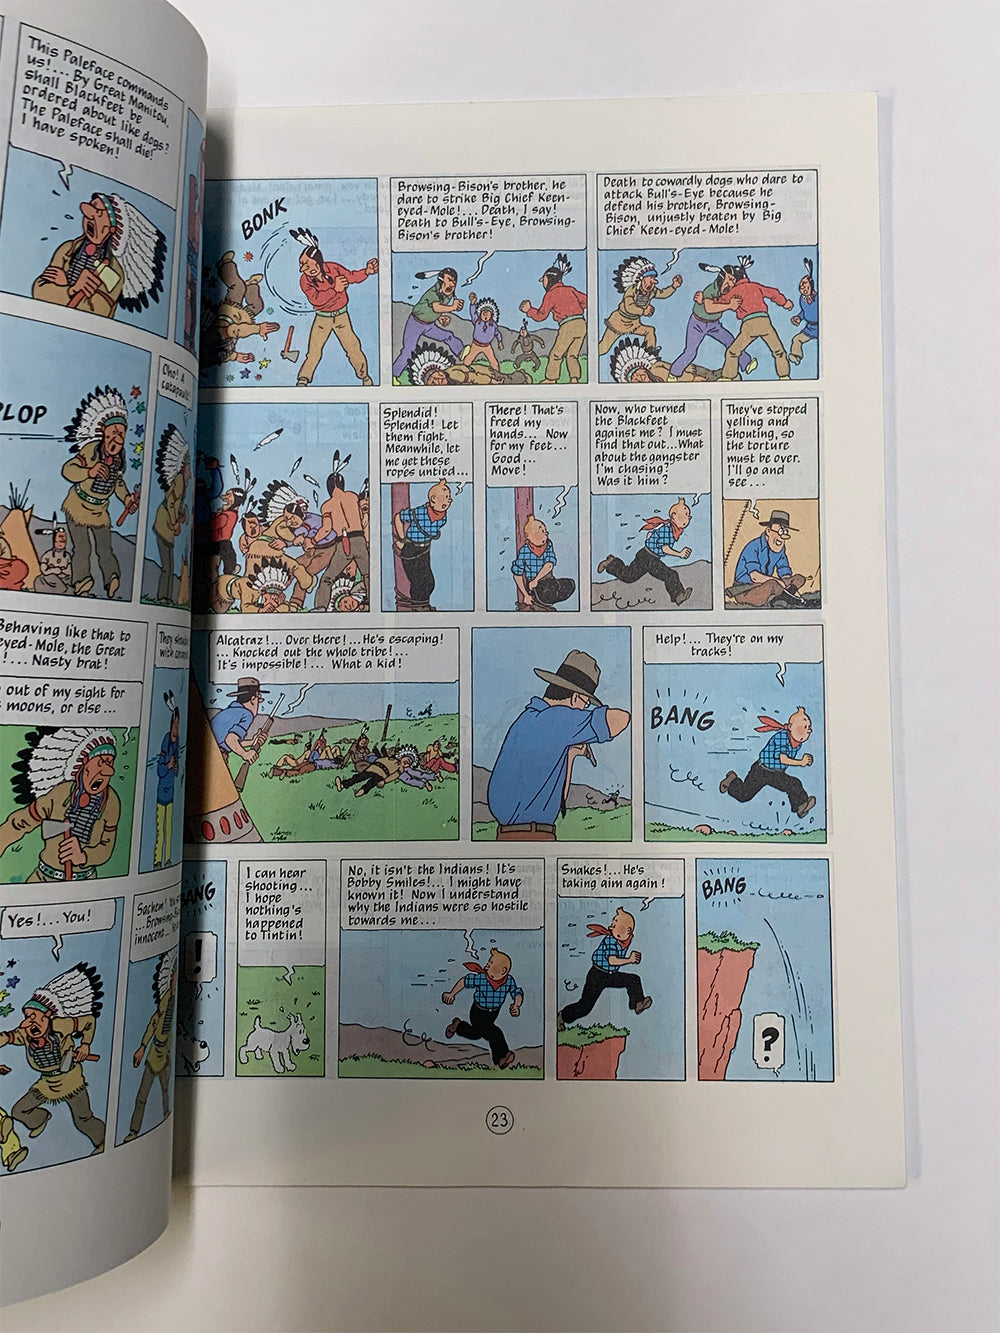 Kuifje- Tintin in America (Engels), nummer 3